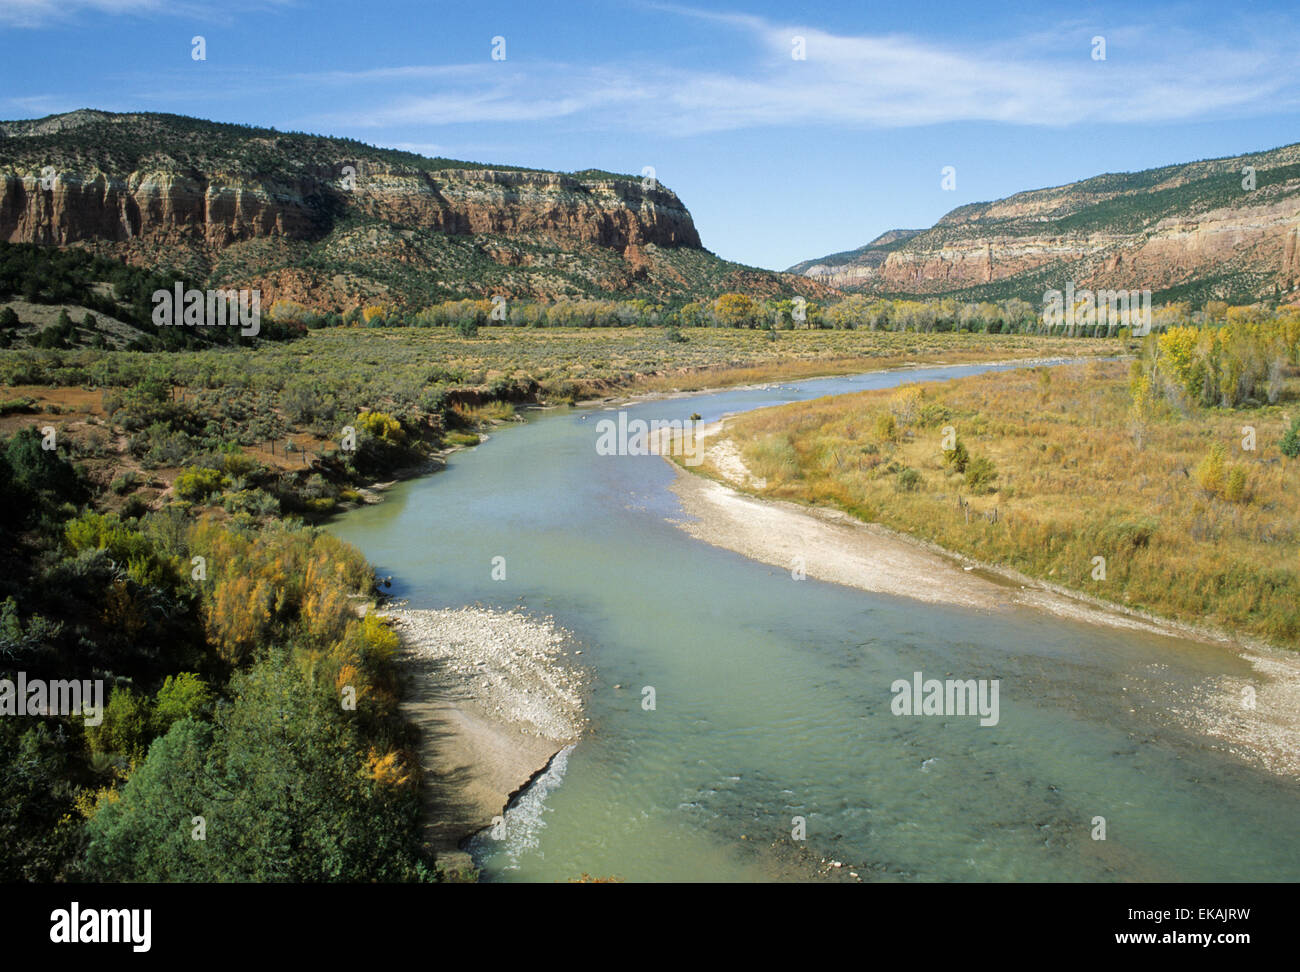 An idyllic view of the Chama River Wilderness Area near Abiquiu, NM in September. Stock Photo